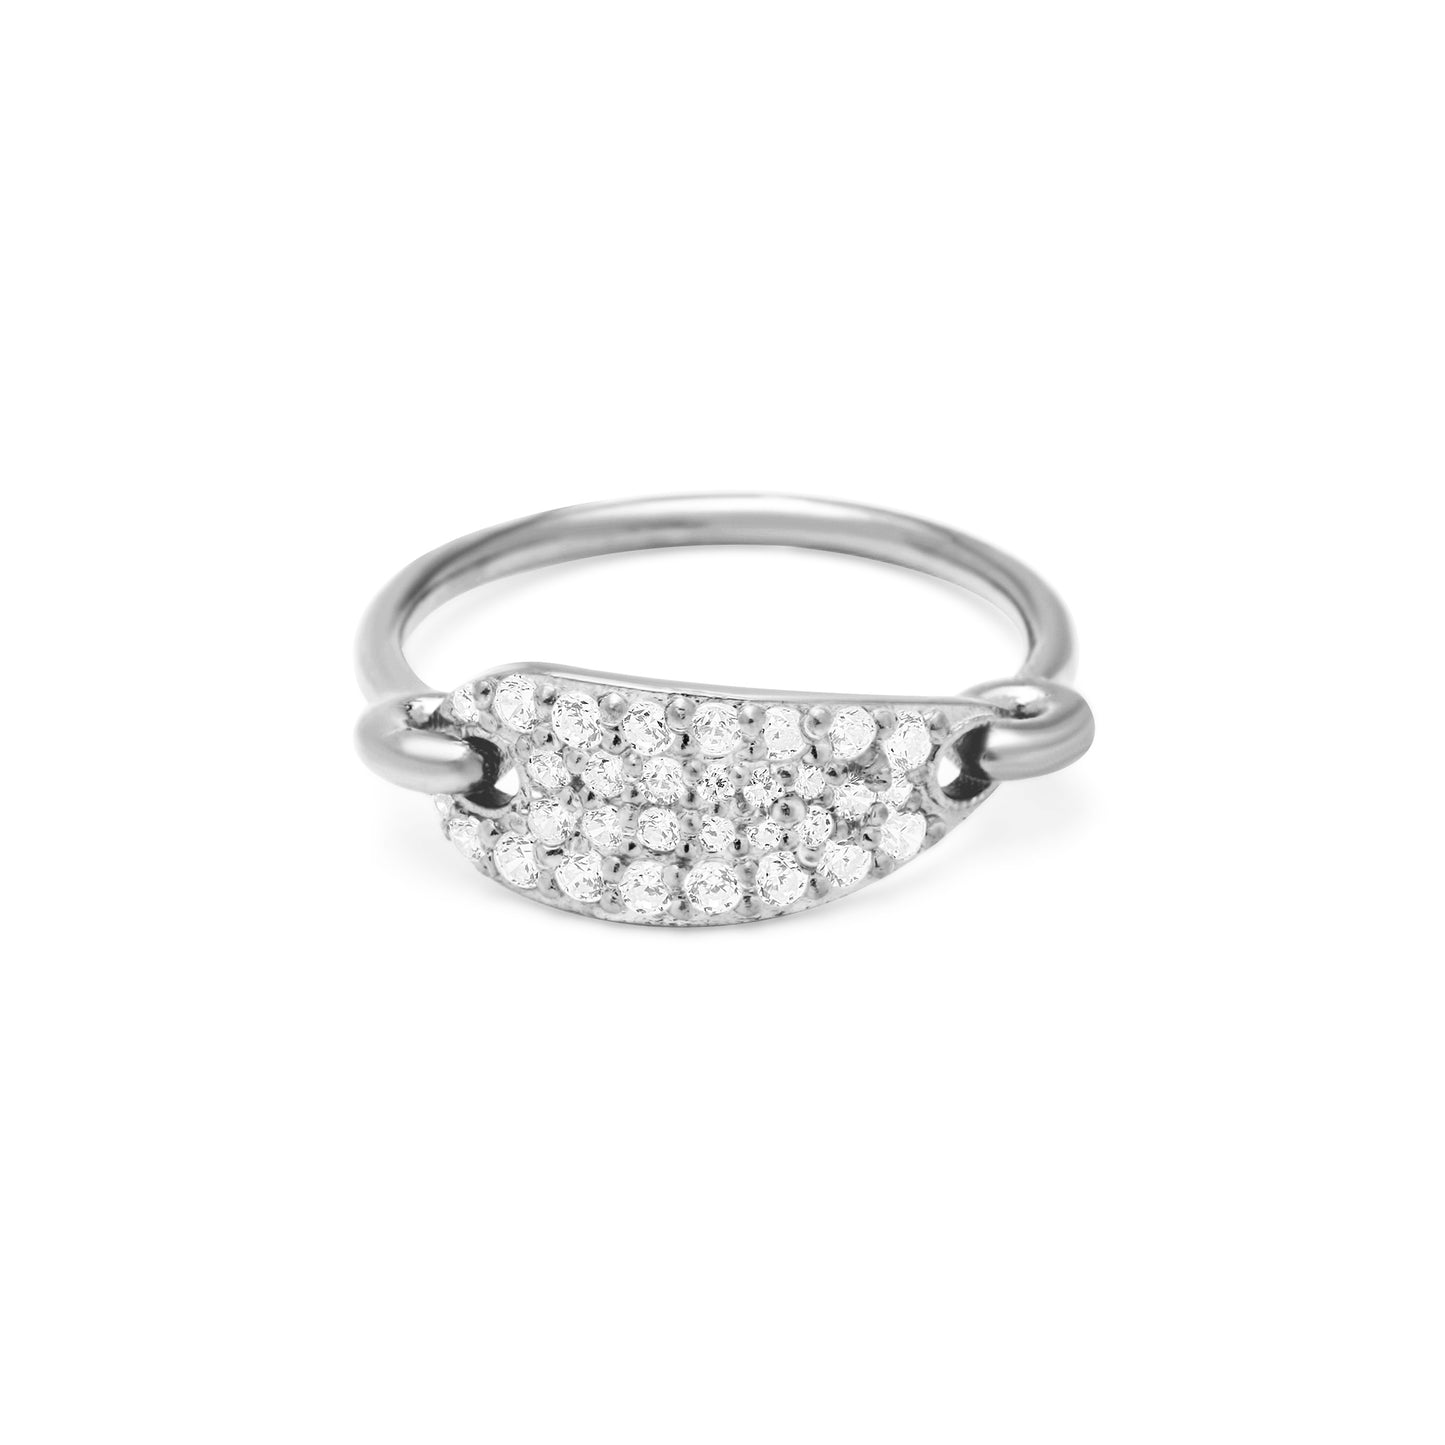 White Pebble Pave Ring - Silver Rhodium Plated